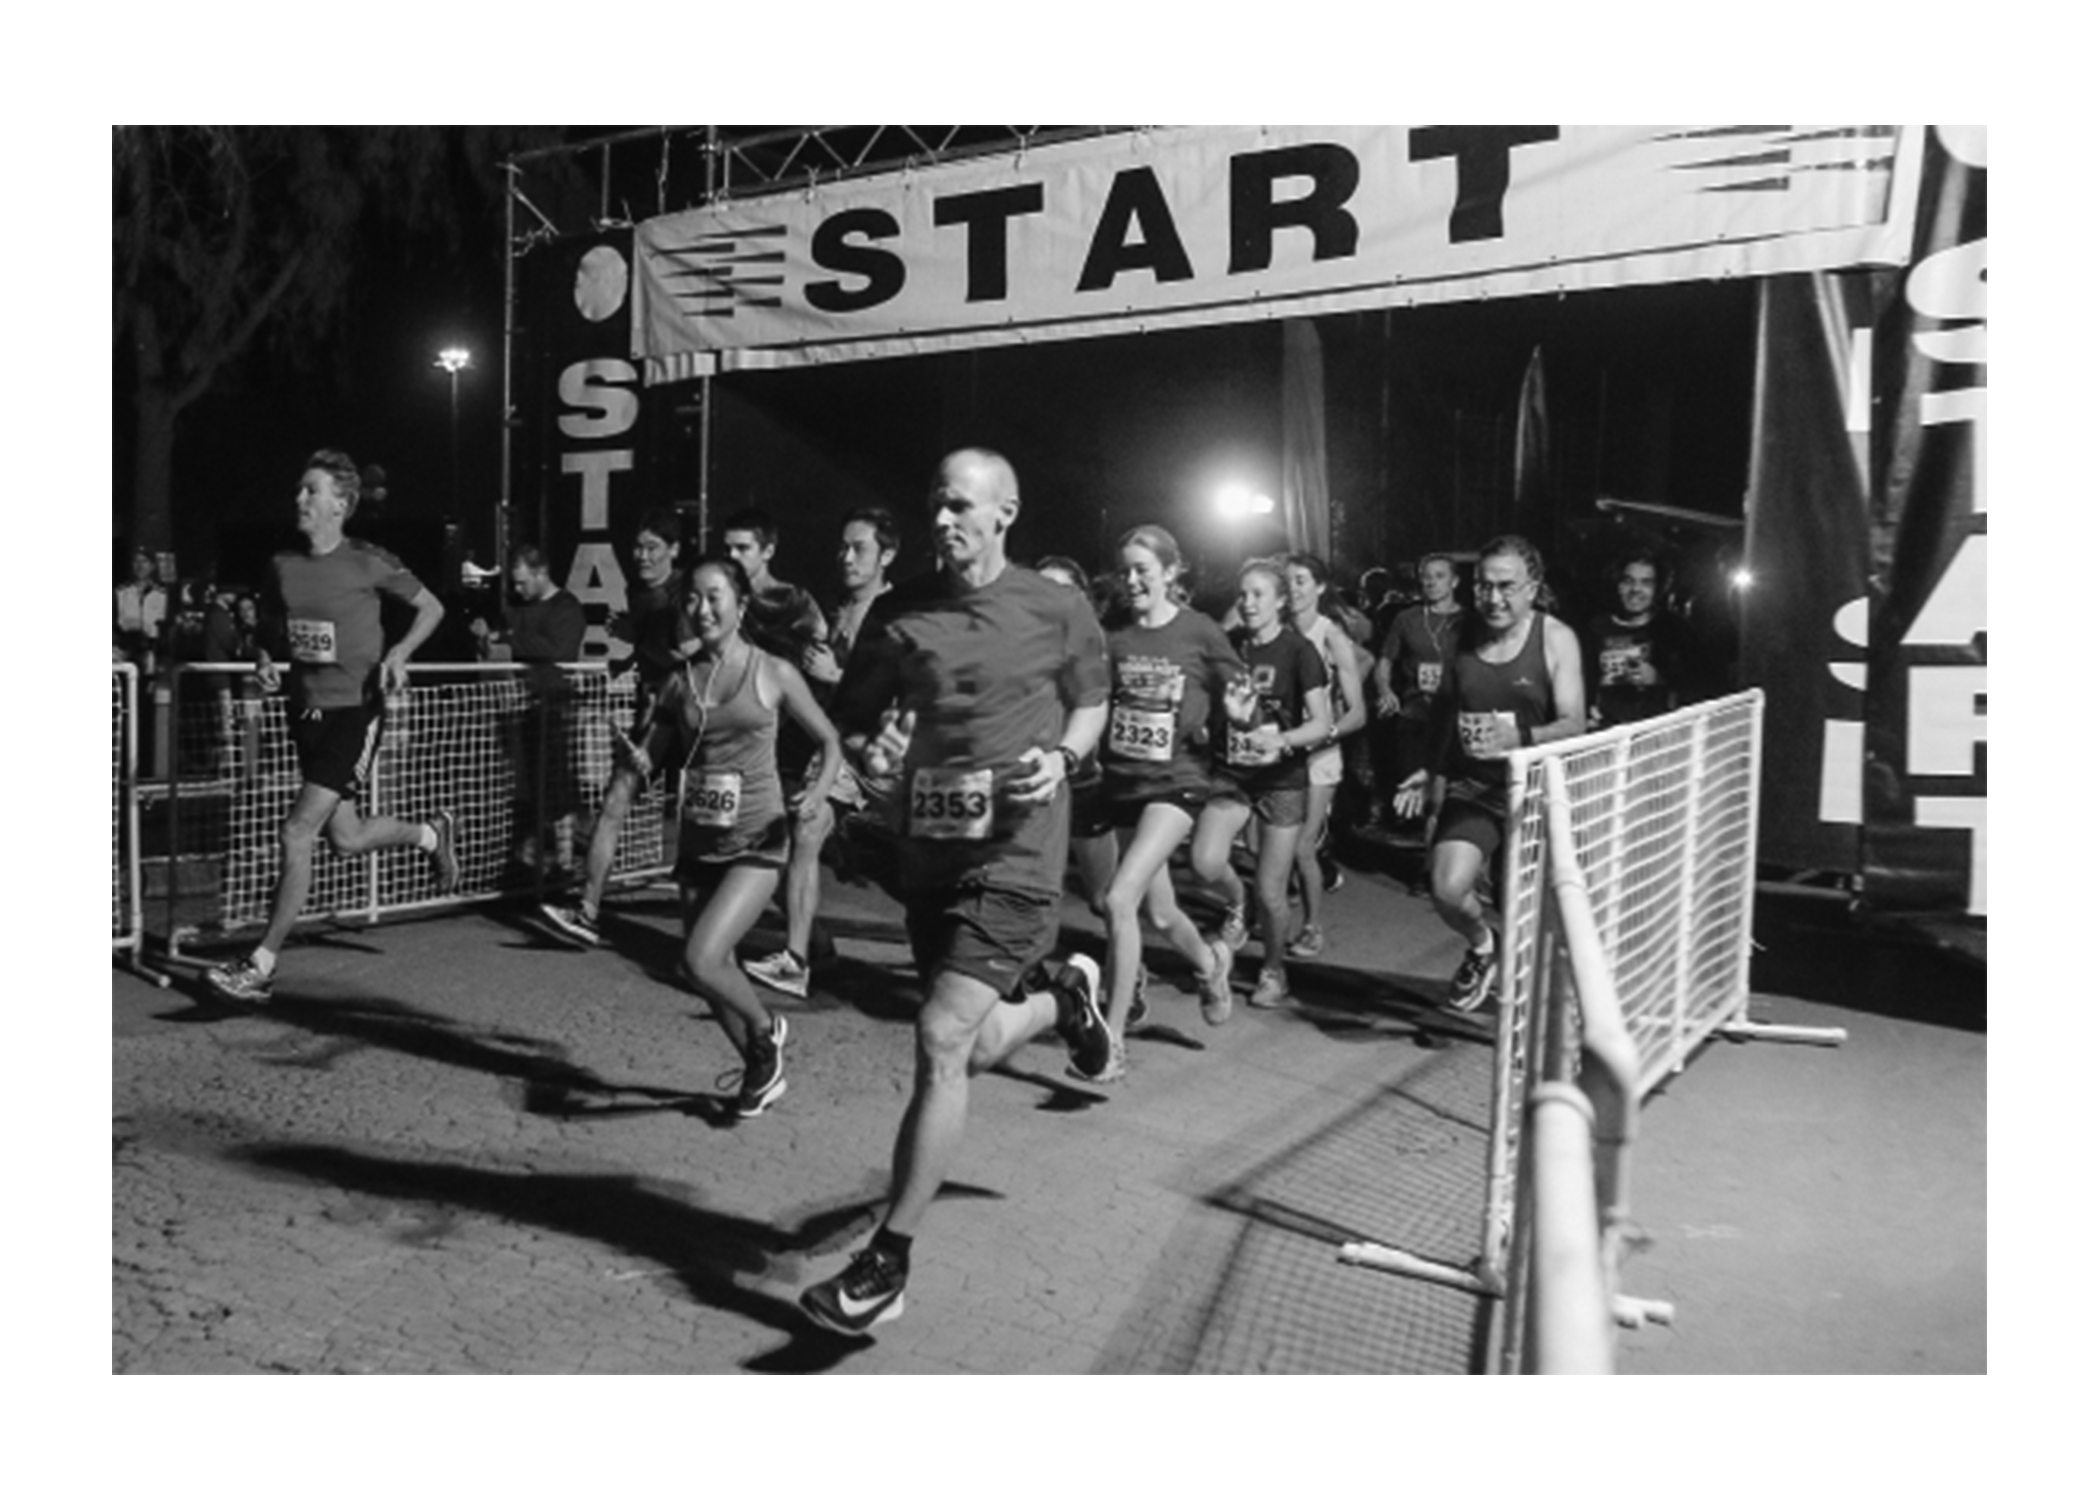 Community plans to participate in annual Moonlight Run